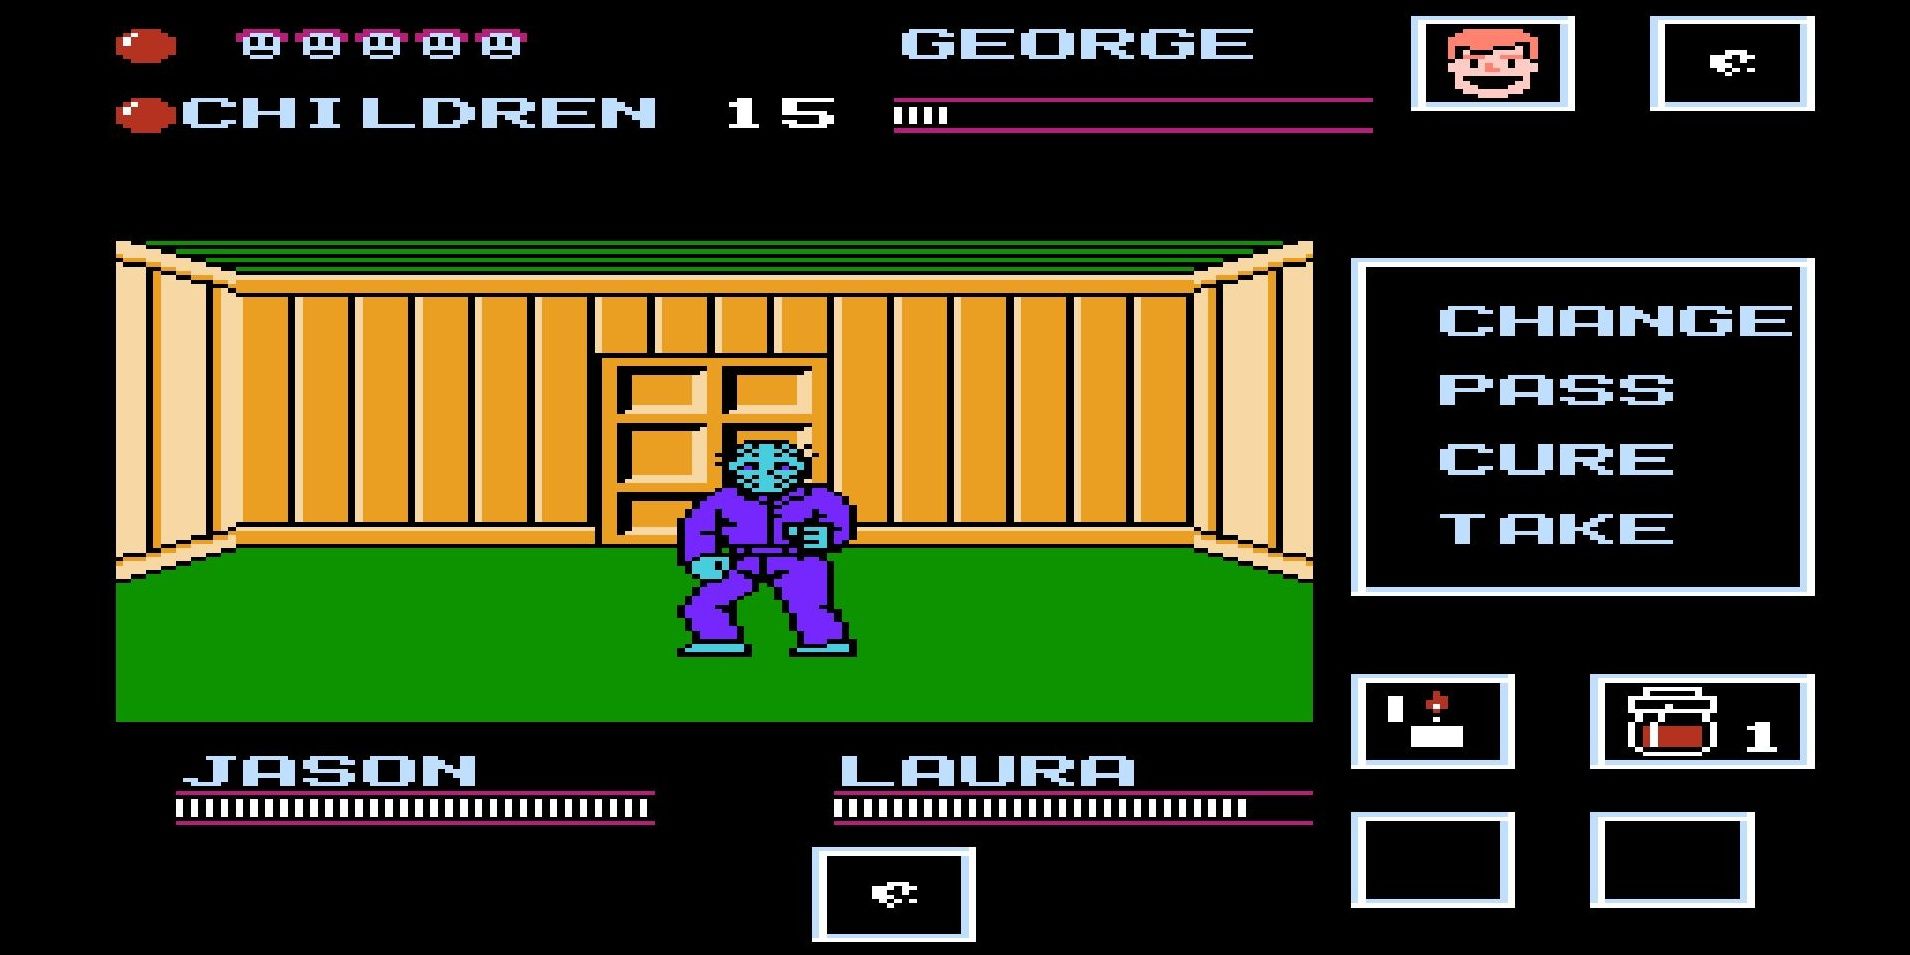 Fighting Jason in Friday the 13th NES